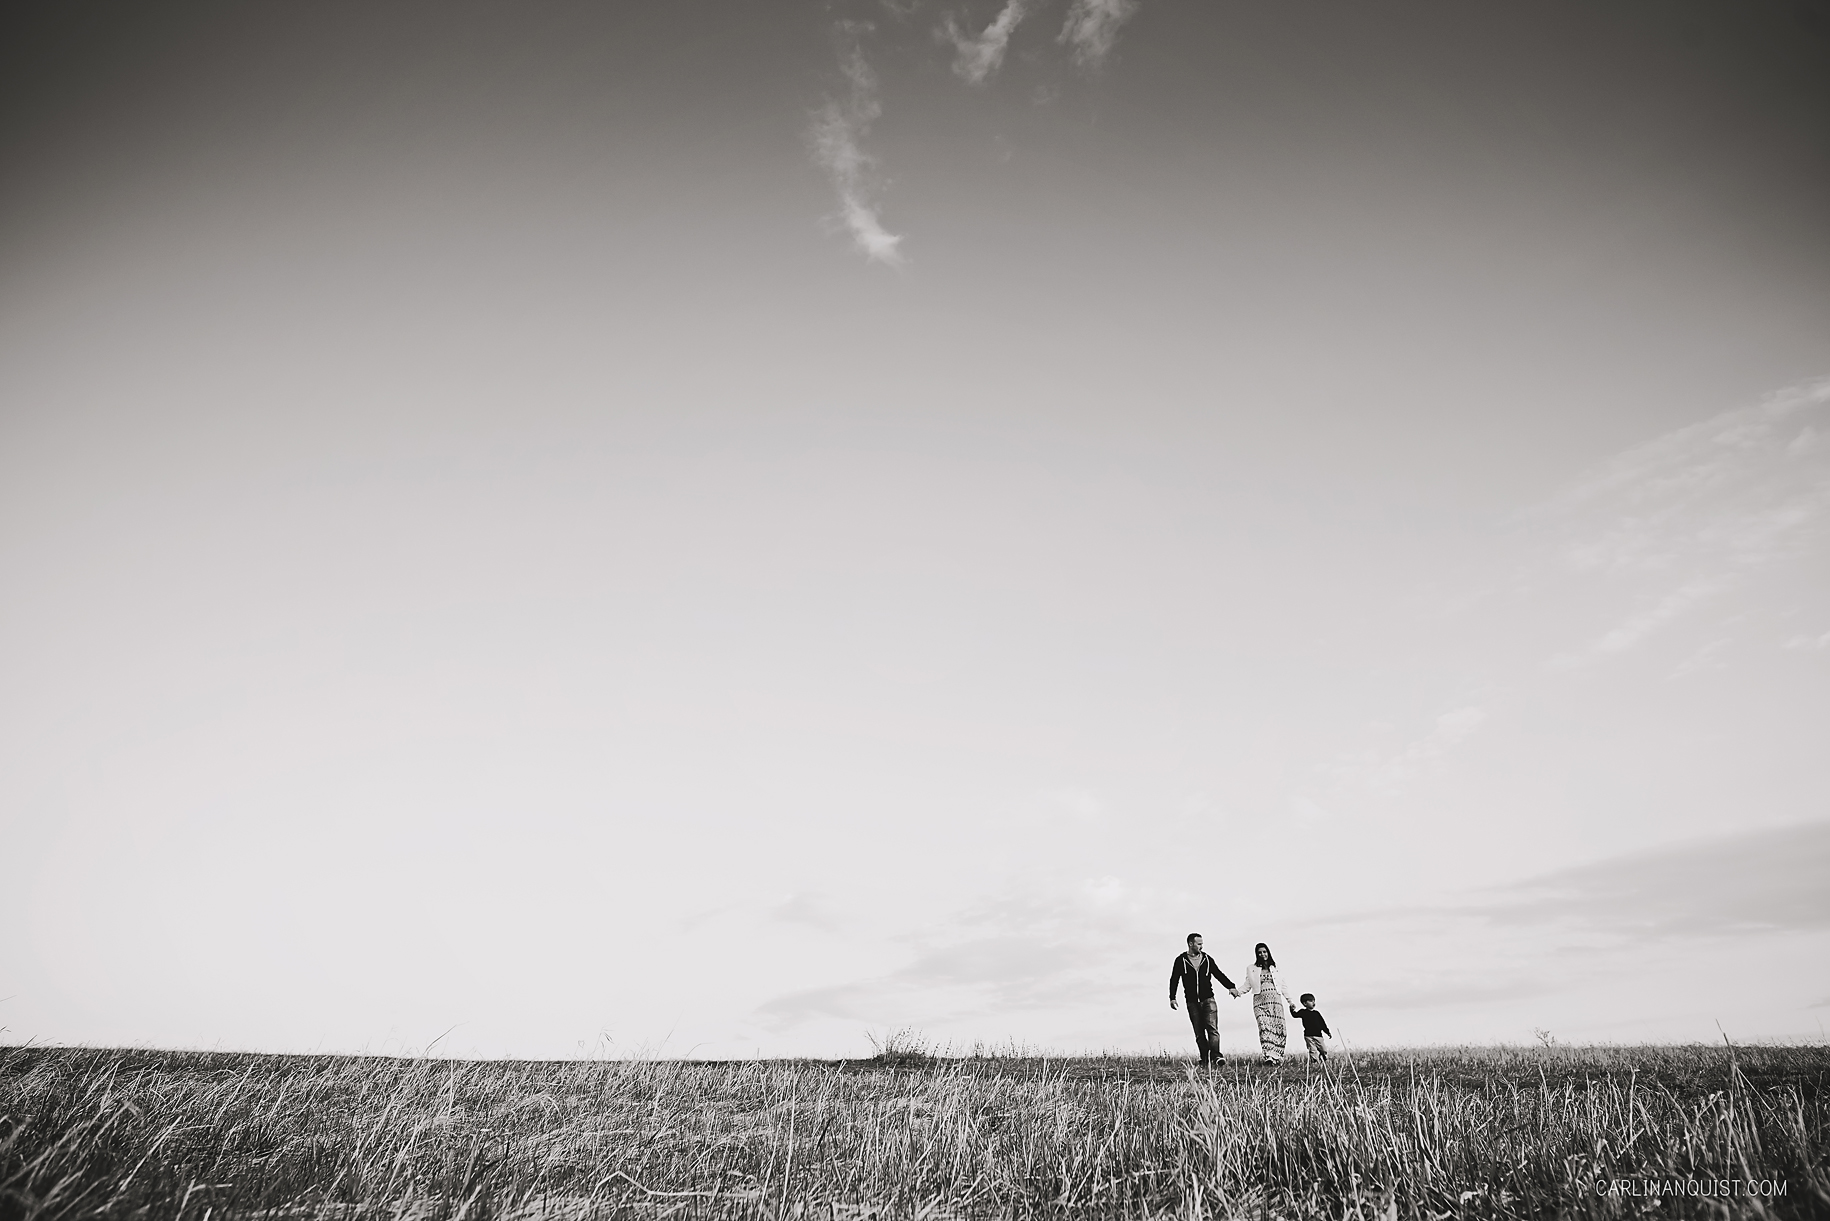 Kids, New Baby, Maternity, Calgary Photographer, Nose Hill Park, Open Skies, Carlin Anquist Photography 